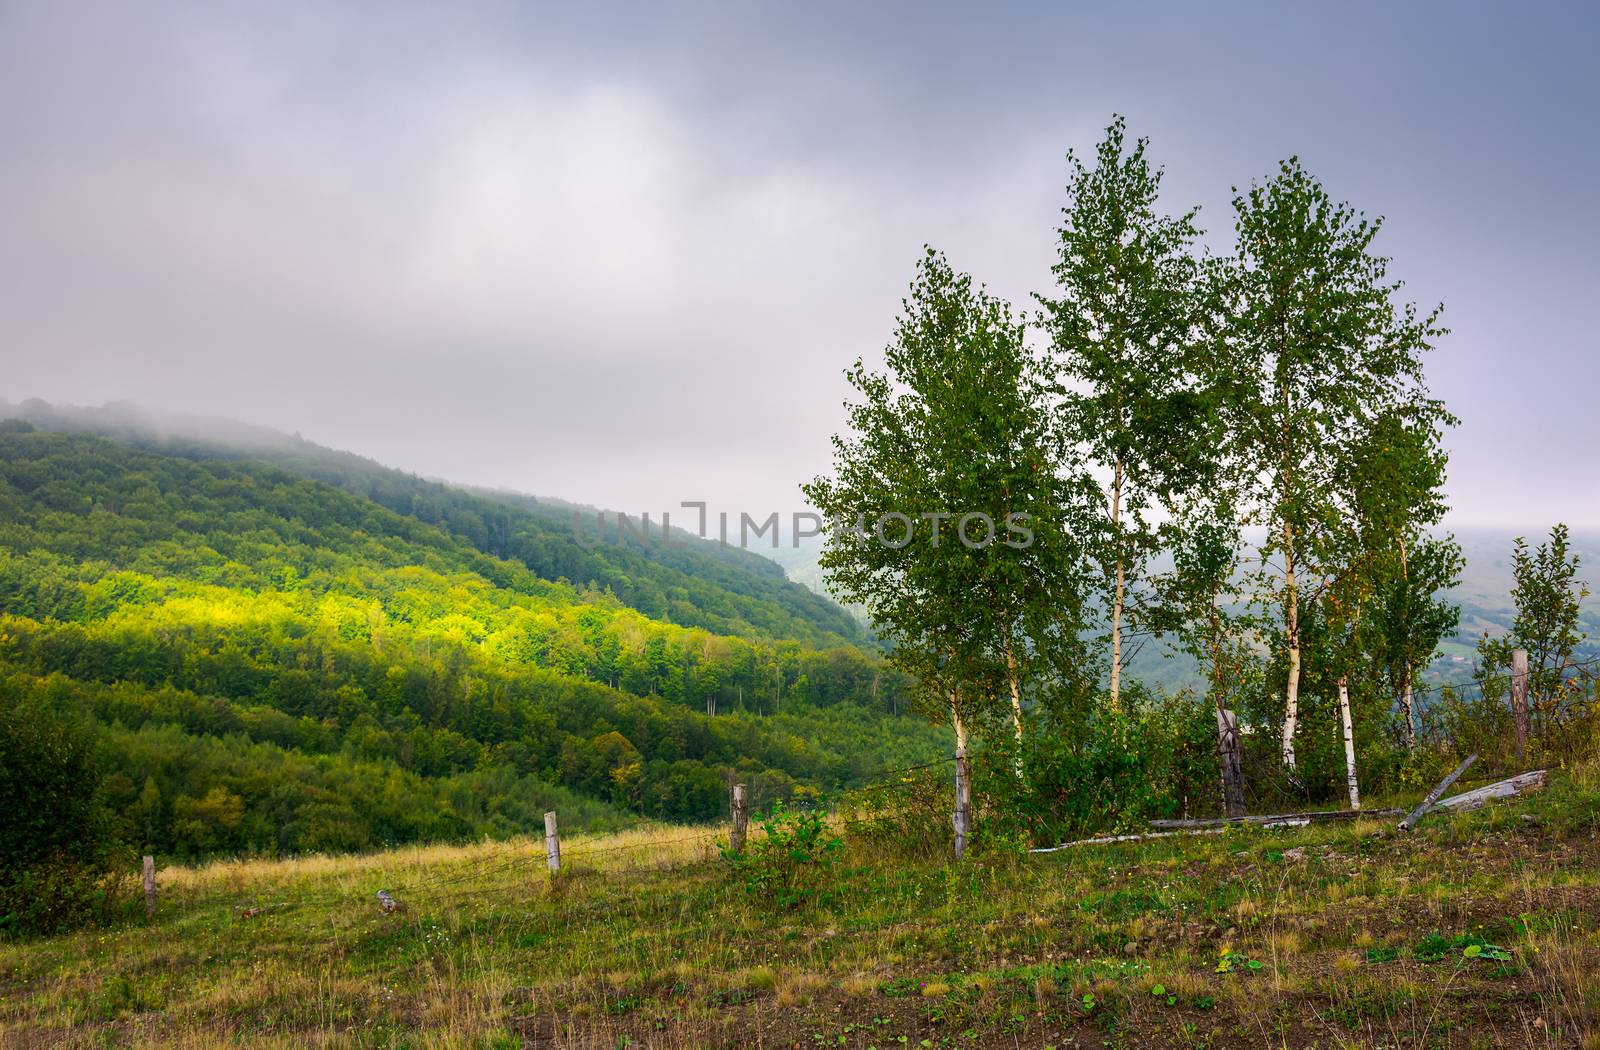 birch trees behind the fence on a hillside in autumn. lovely countryside scenery in mountains under overcast sky. beam of light drops on distant mountain